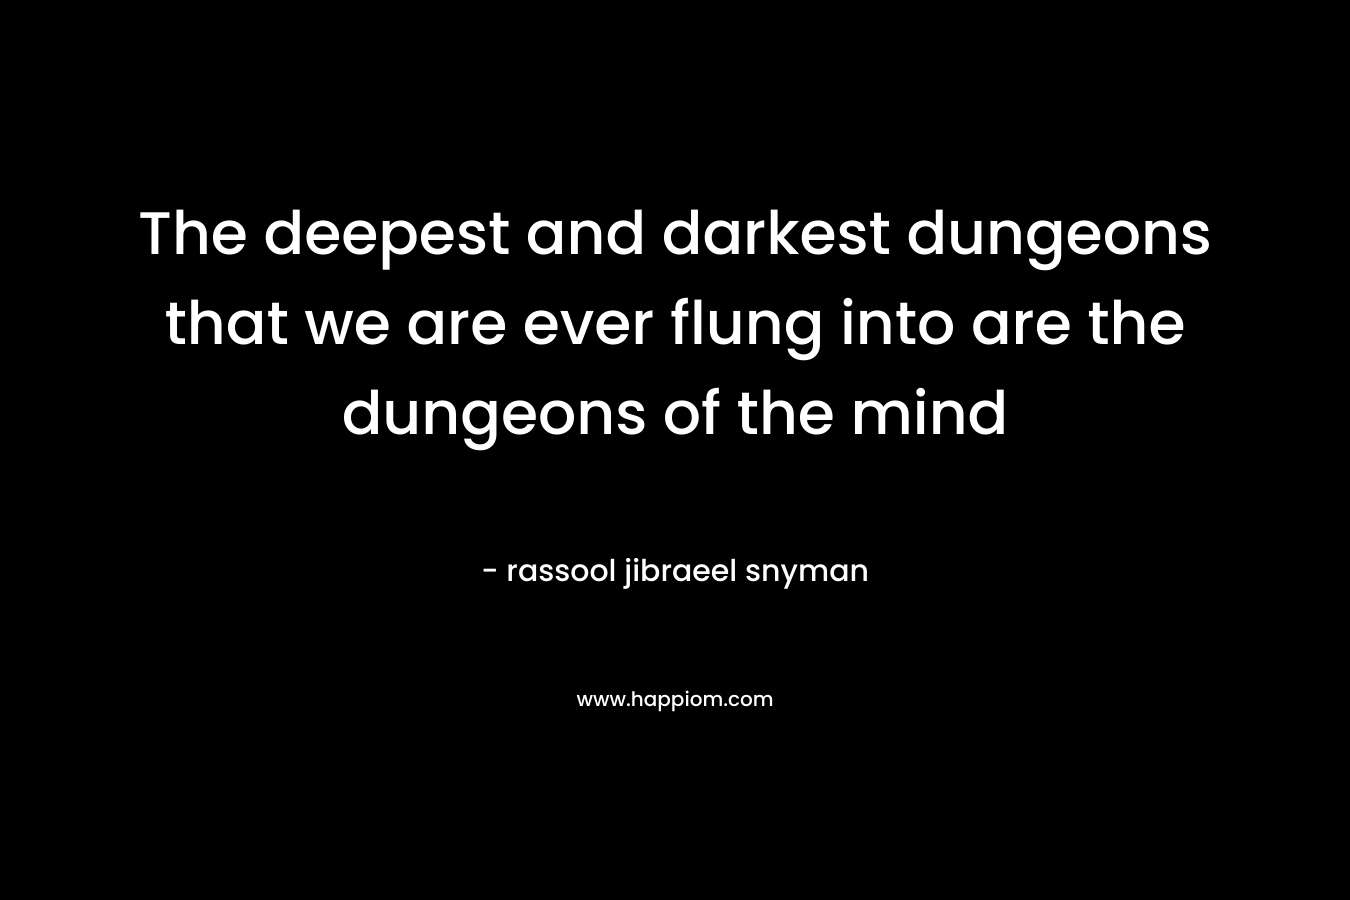 The deepest and darkest dungeons that we are ever flung into are the dungeons of the mind – rassool jibraeel snyman